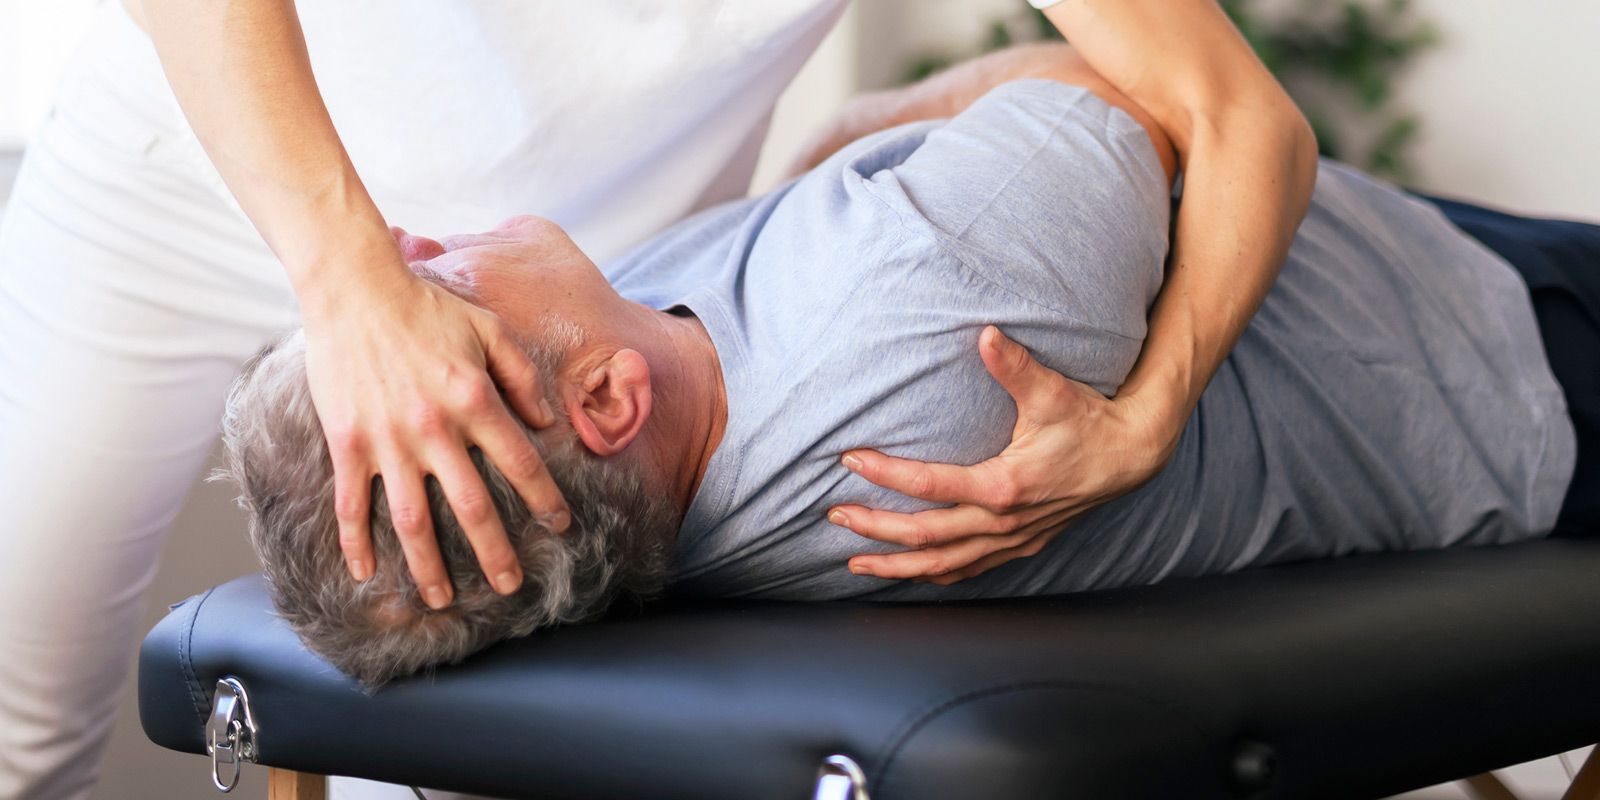 Upper Back Pain Relief NYC - Dr. Alicia Armitstead. Chiropractic Thoracic Spine Treatments at the Healing Arts NY Health and Wellness Center in Manhattan NY 10017